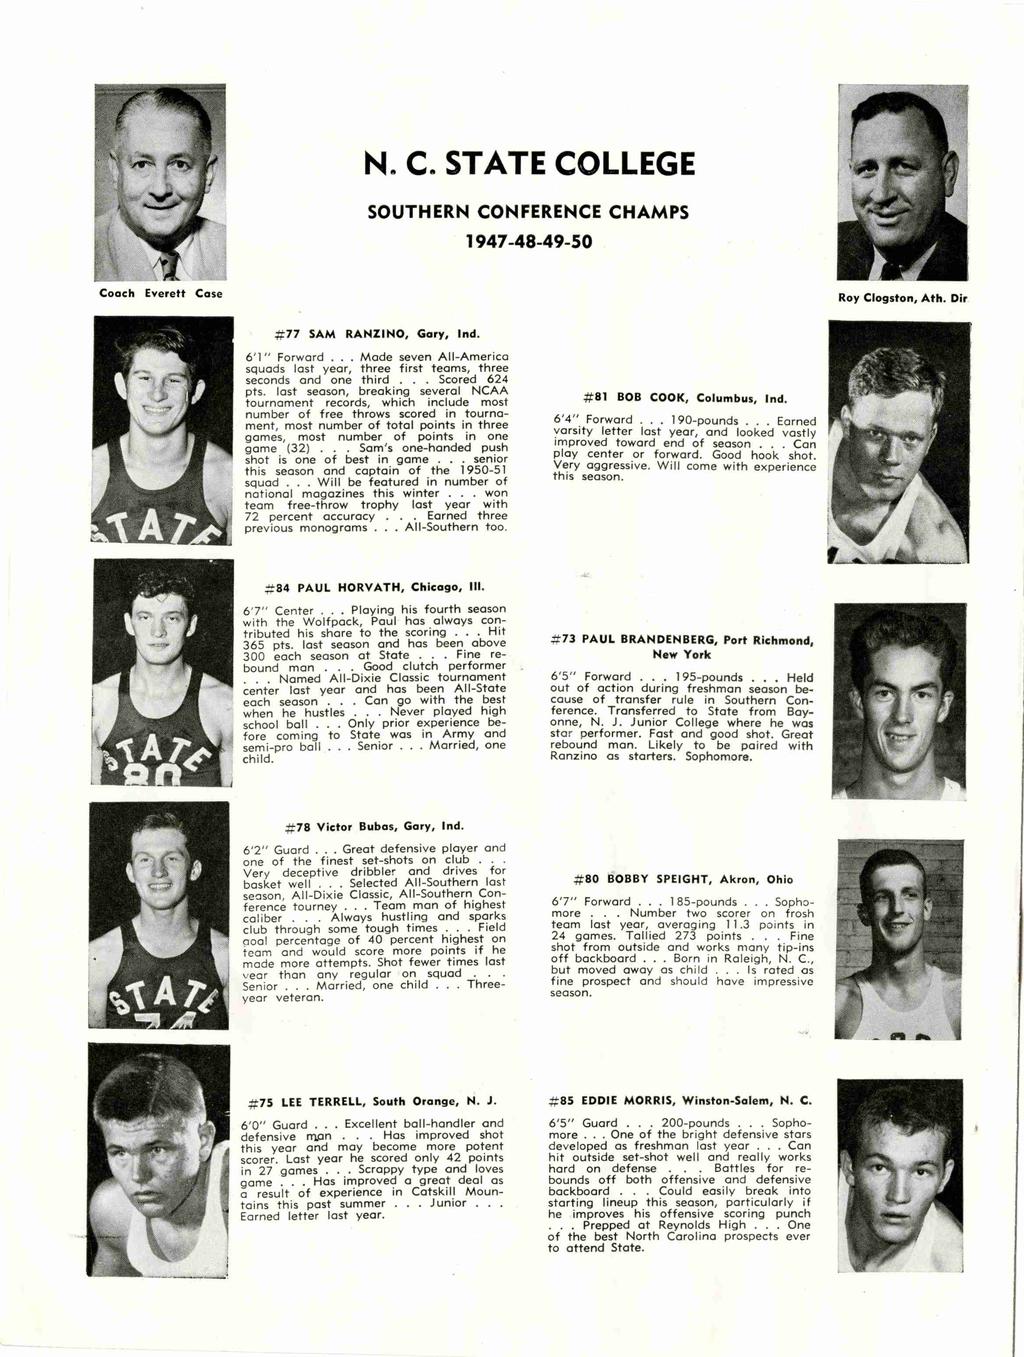 N C STATE COLLEGE SOUTHERN CONFERENCE CHAMPS 1947-48-49-50 Coach Everett Case Roy Clogston, Ath Dir #77 SAM RANZNO, Gary, nd 6 l Forward Made seven All-America squads last year, three first teams,